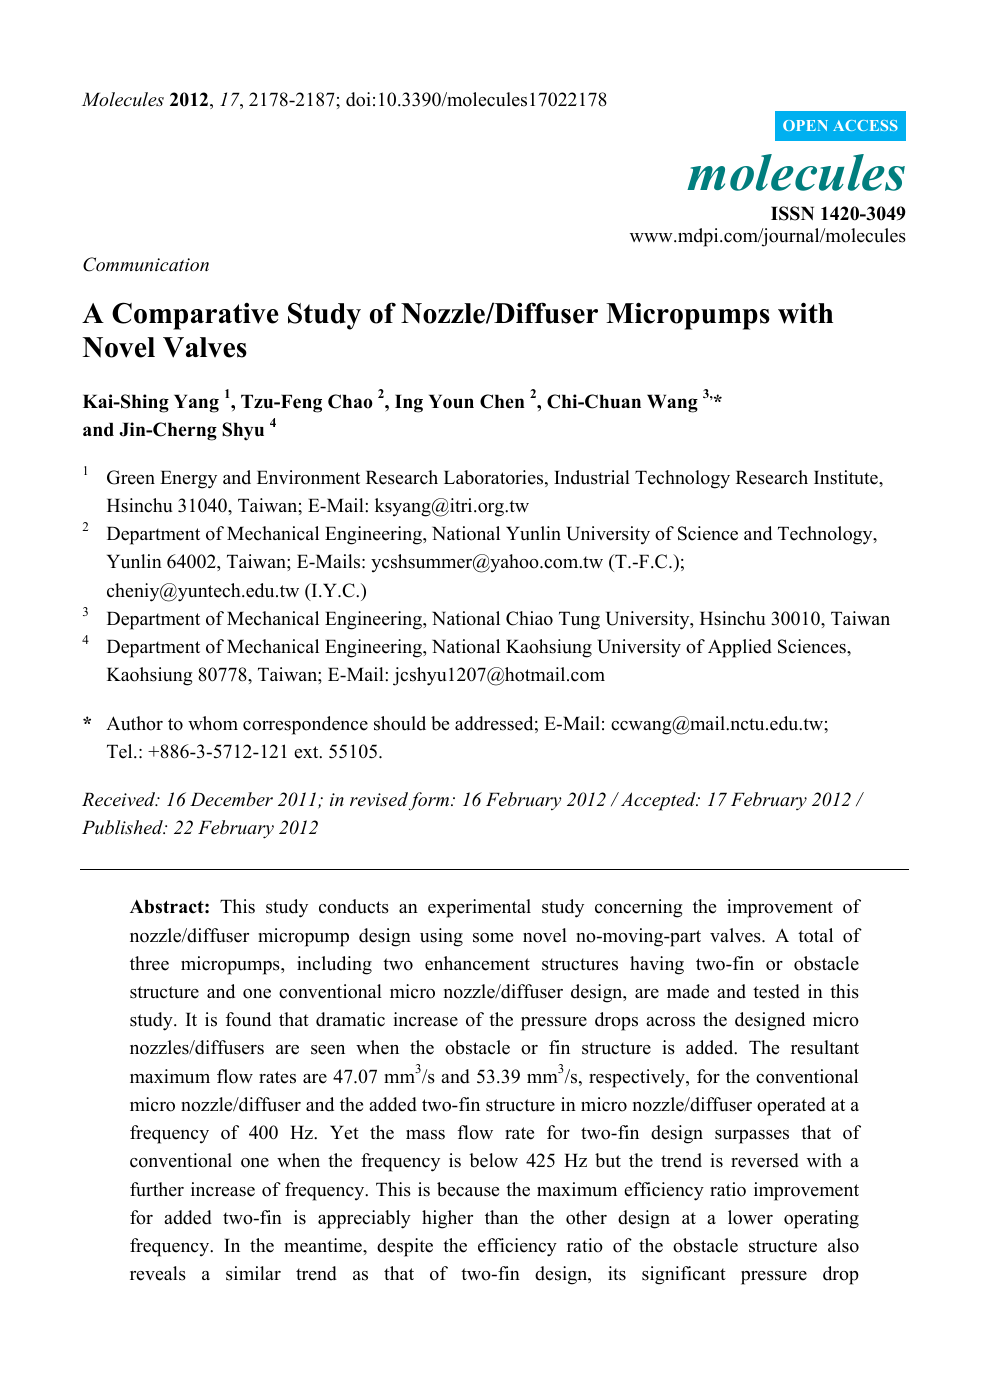 A Comparative Study Of Nozzle Diffuser Micropumps With Novel Valves Topic Of Research Paper In Mechanical Engineering Download Scholarly Article Pdf And Read For Free On Cyberleninka Open Science Hub